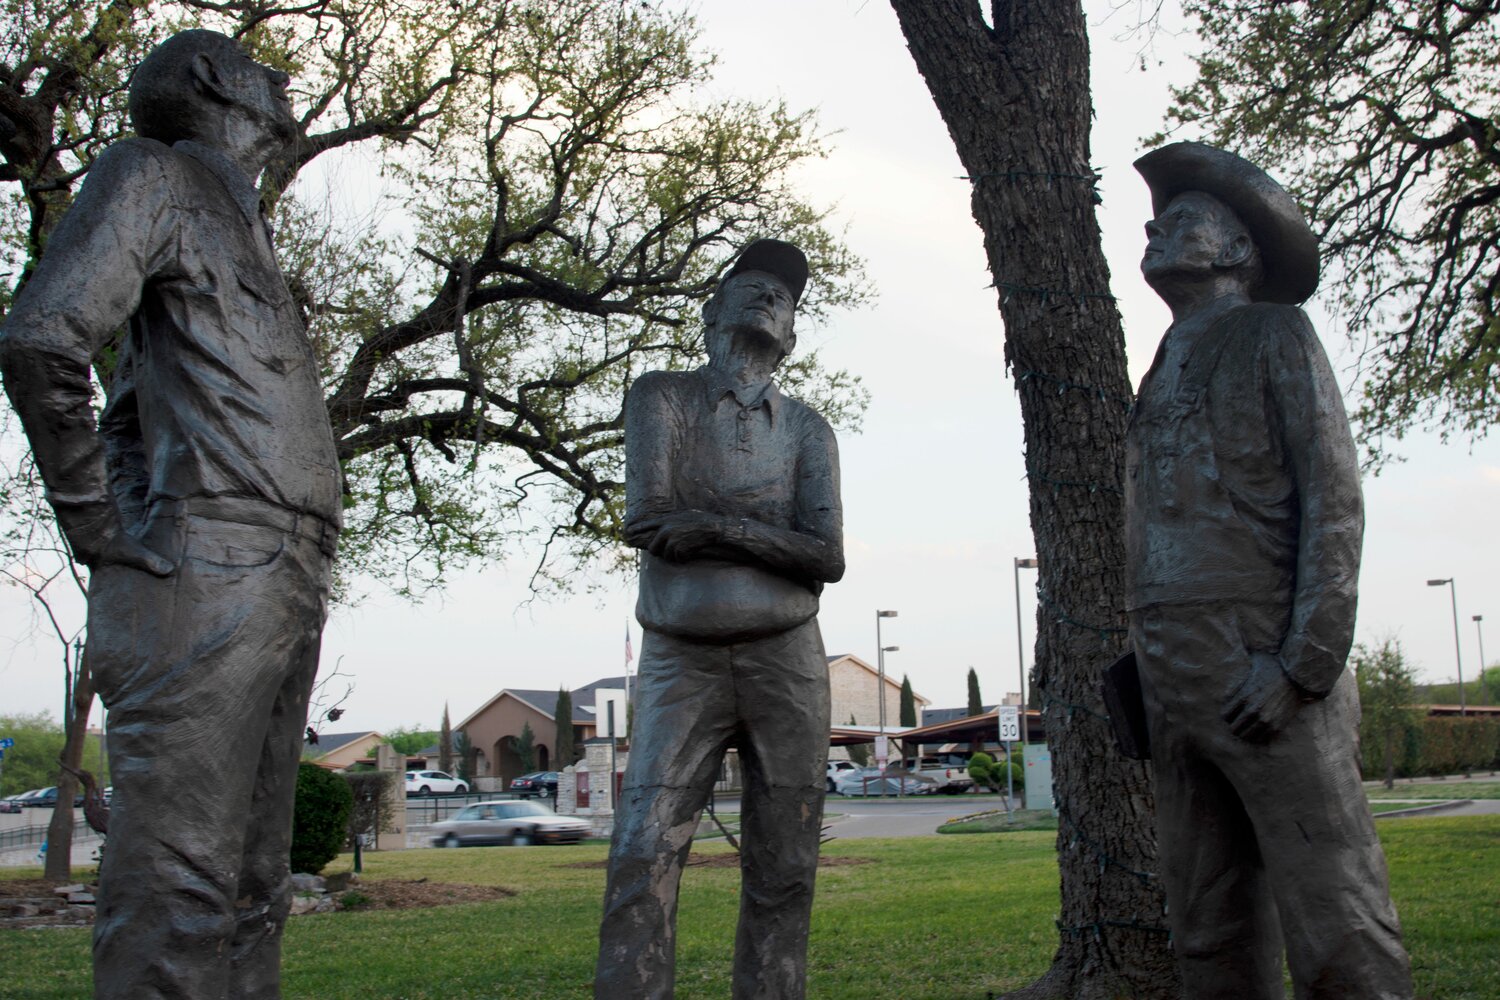 Sculptures at the Langdon Center near the Granbury Square are a favorite with tourists, according to Cultural Arts Commission member David Southern.